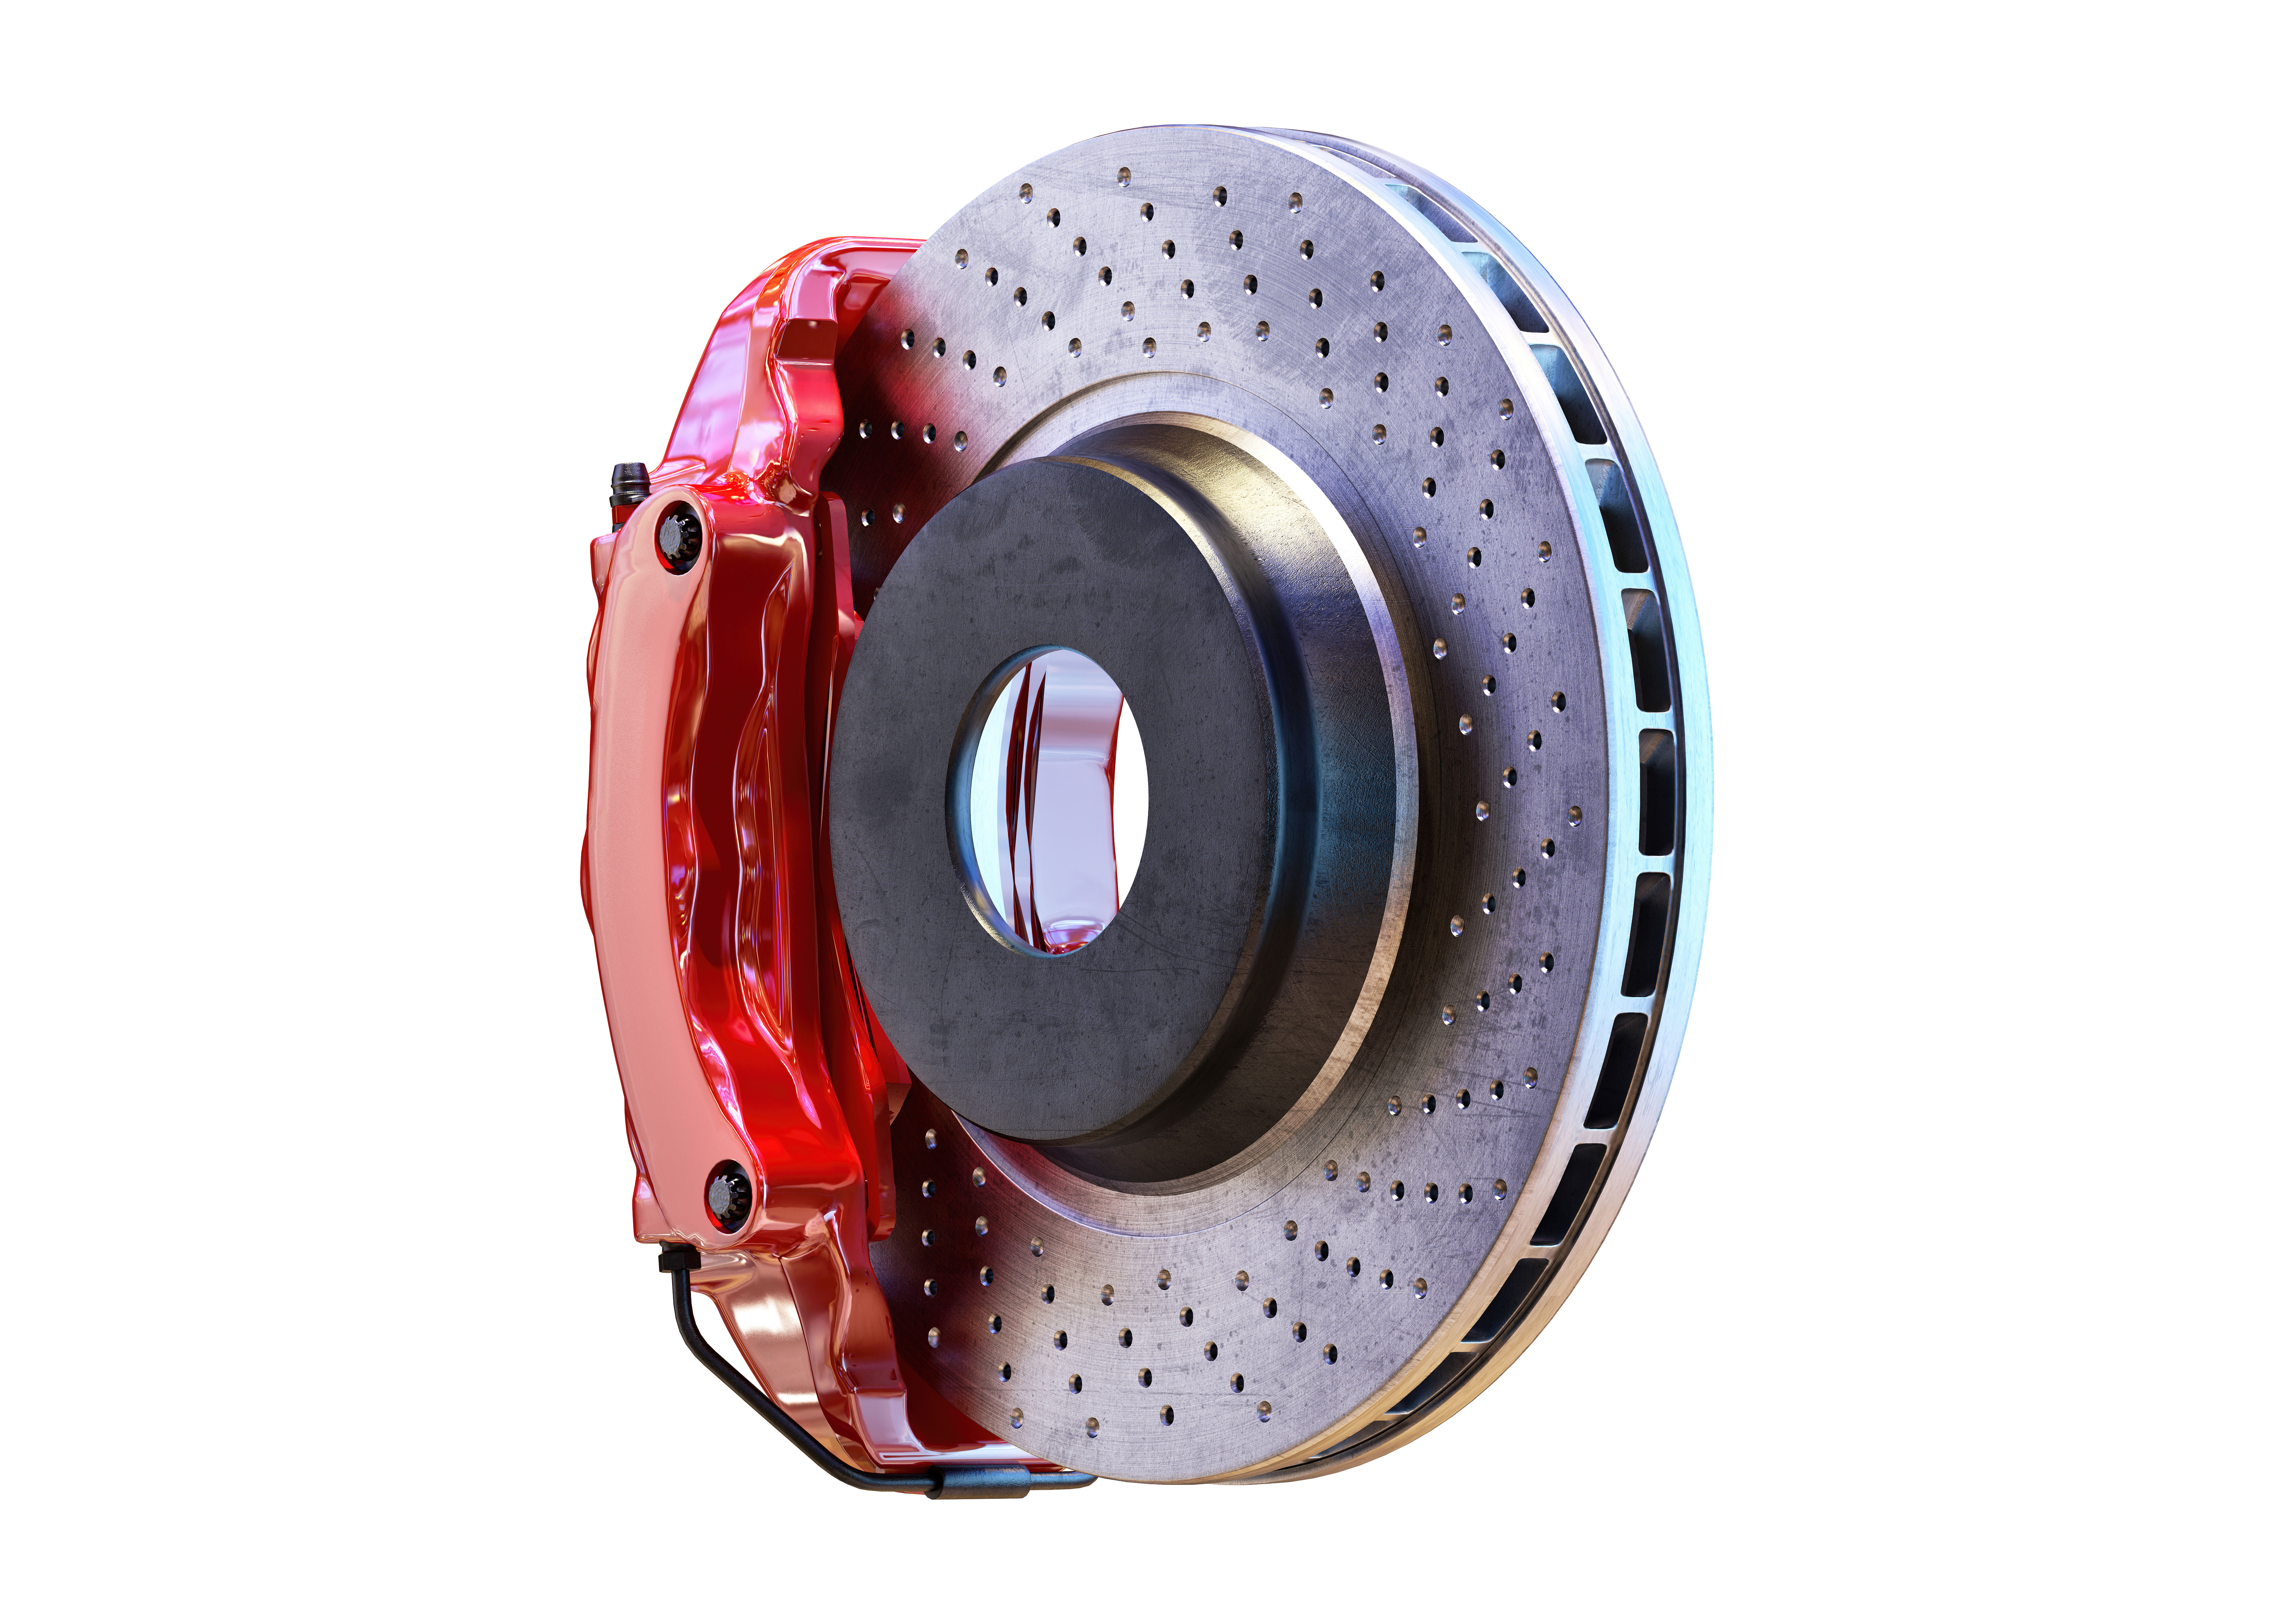 steel disk brake with red sport racing calliper, detail of auto wheel hub isolated on a white background. vehicle disk brake pad repairing, replacing in garage car service, automobile part